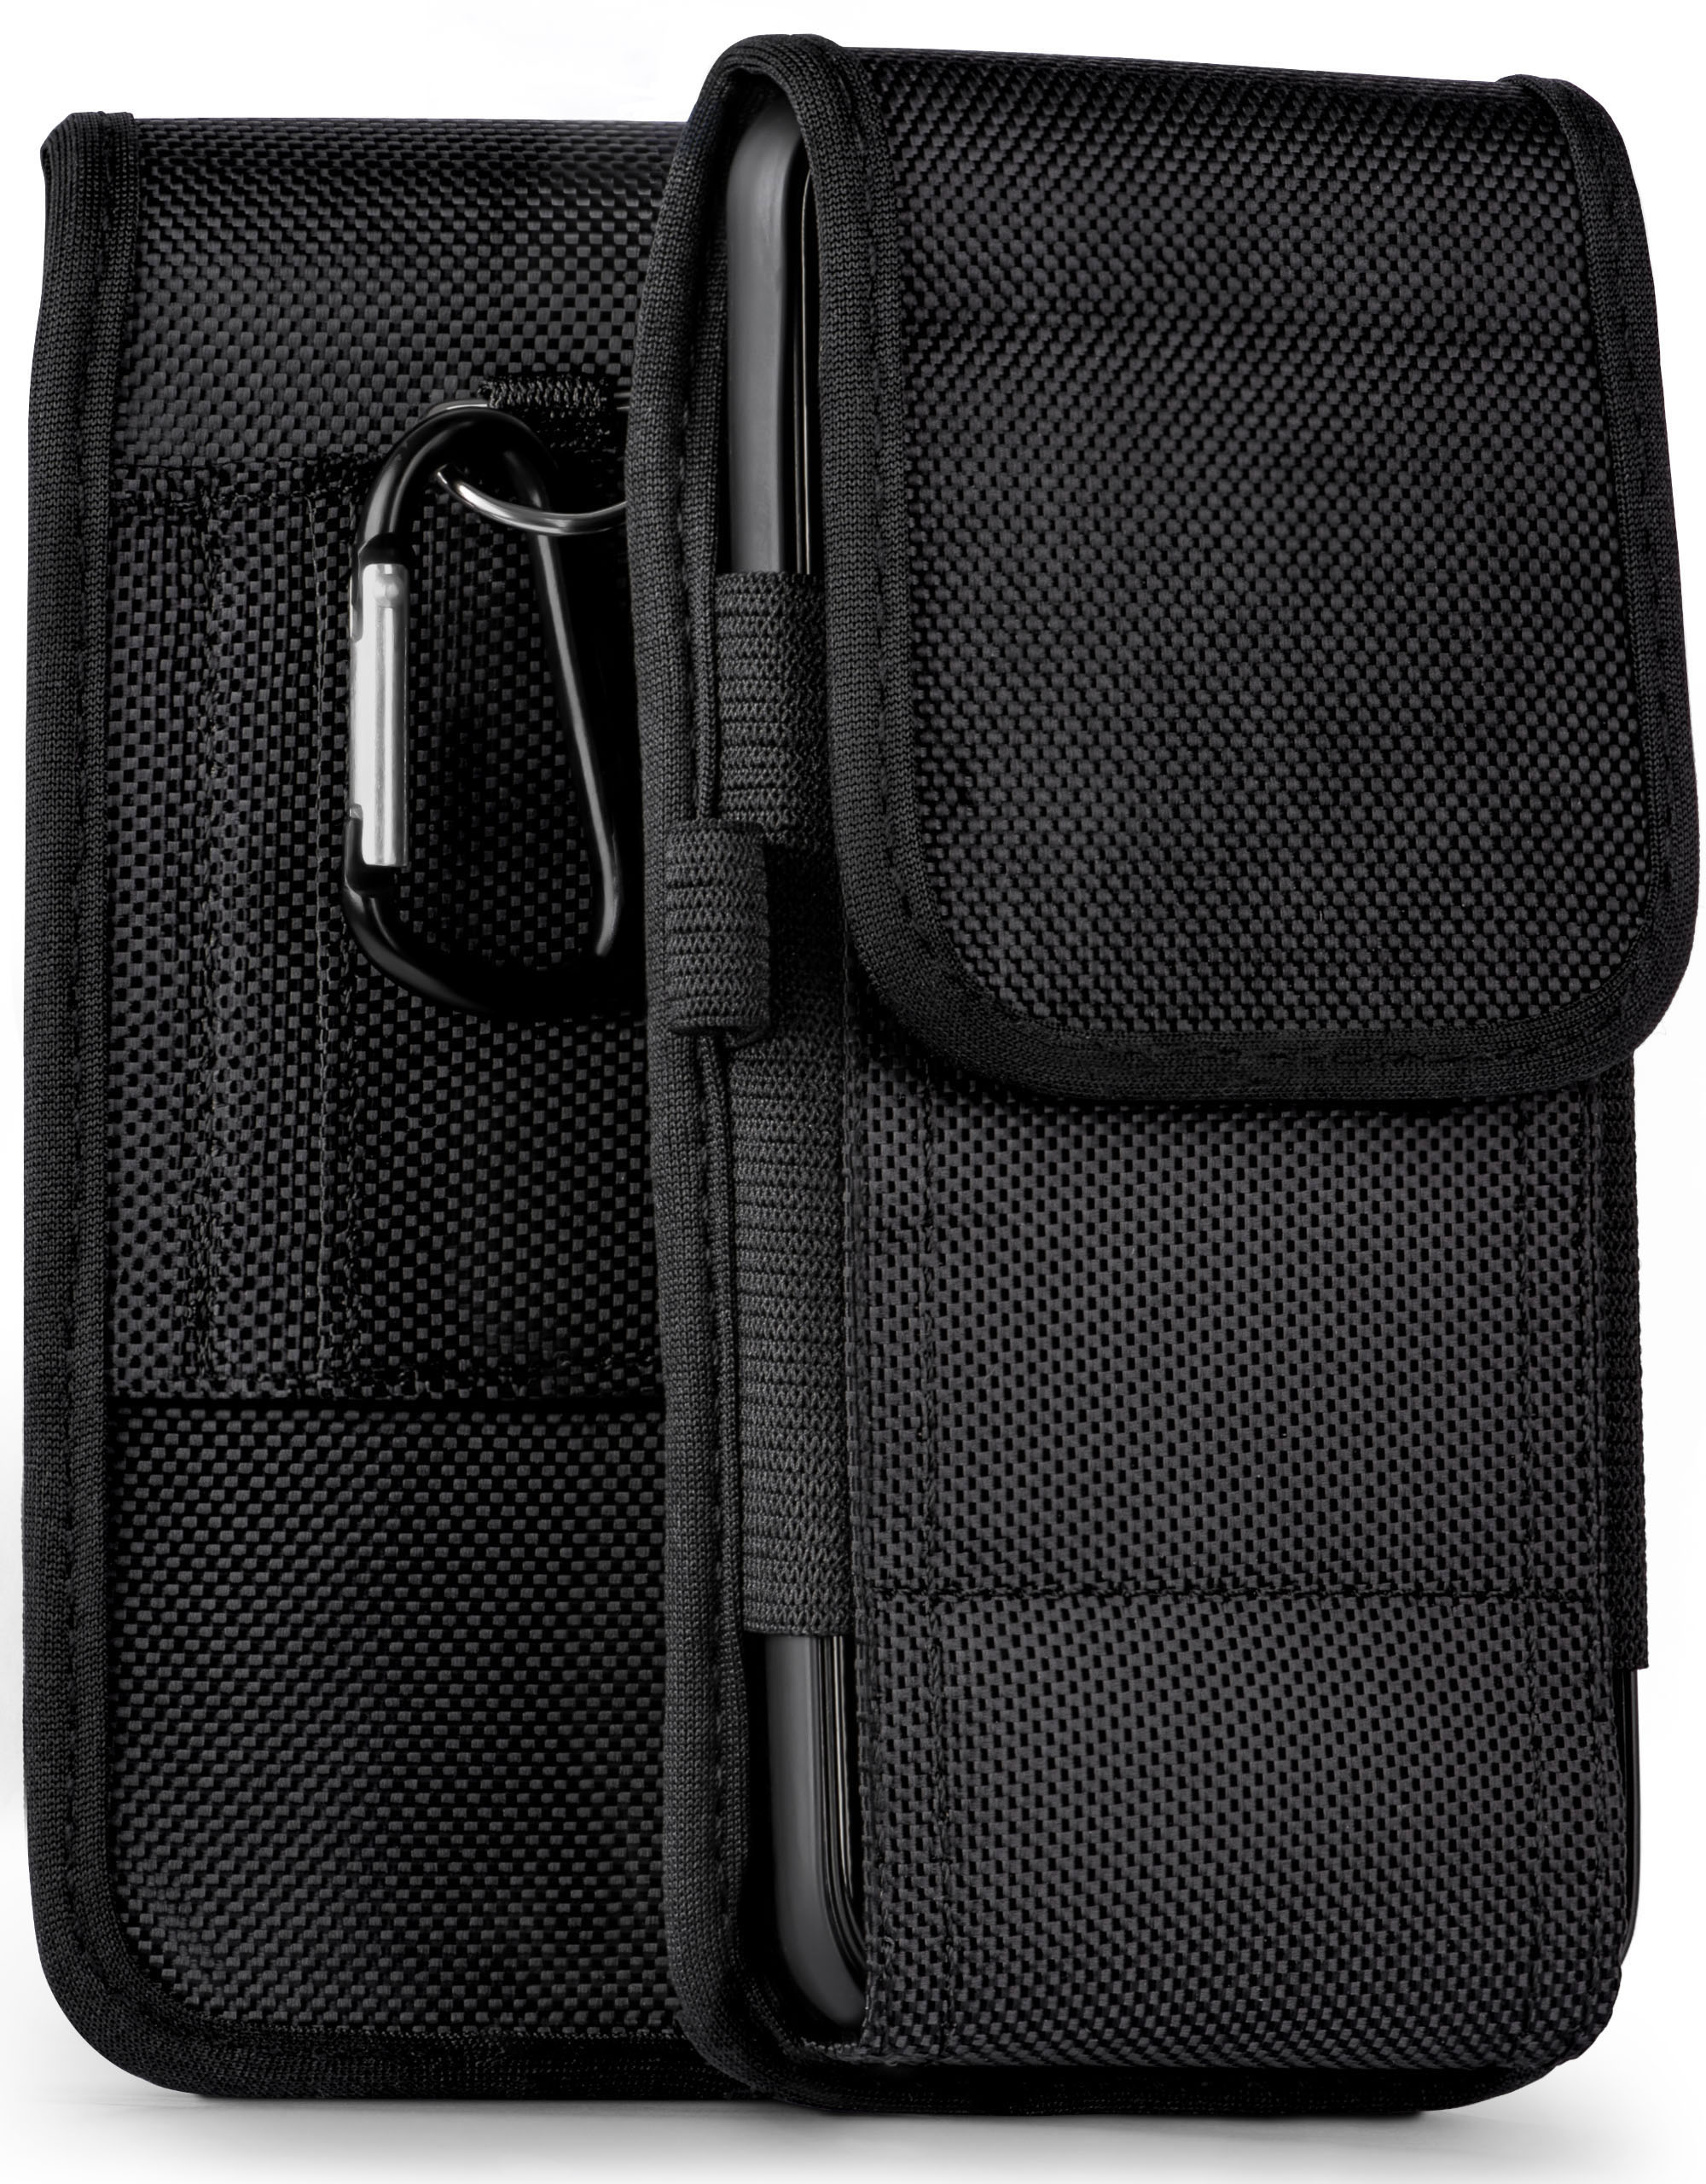 Agility Case, Trail One Motorola, Vision, Holster, MOEX